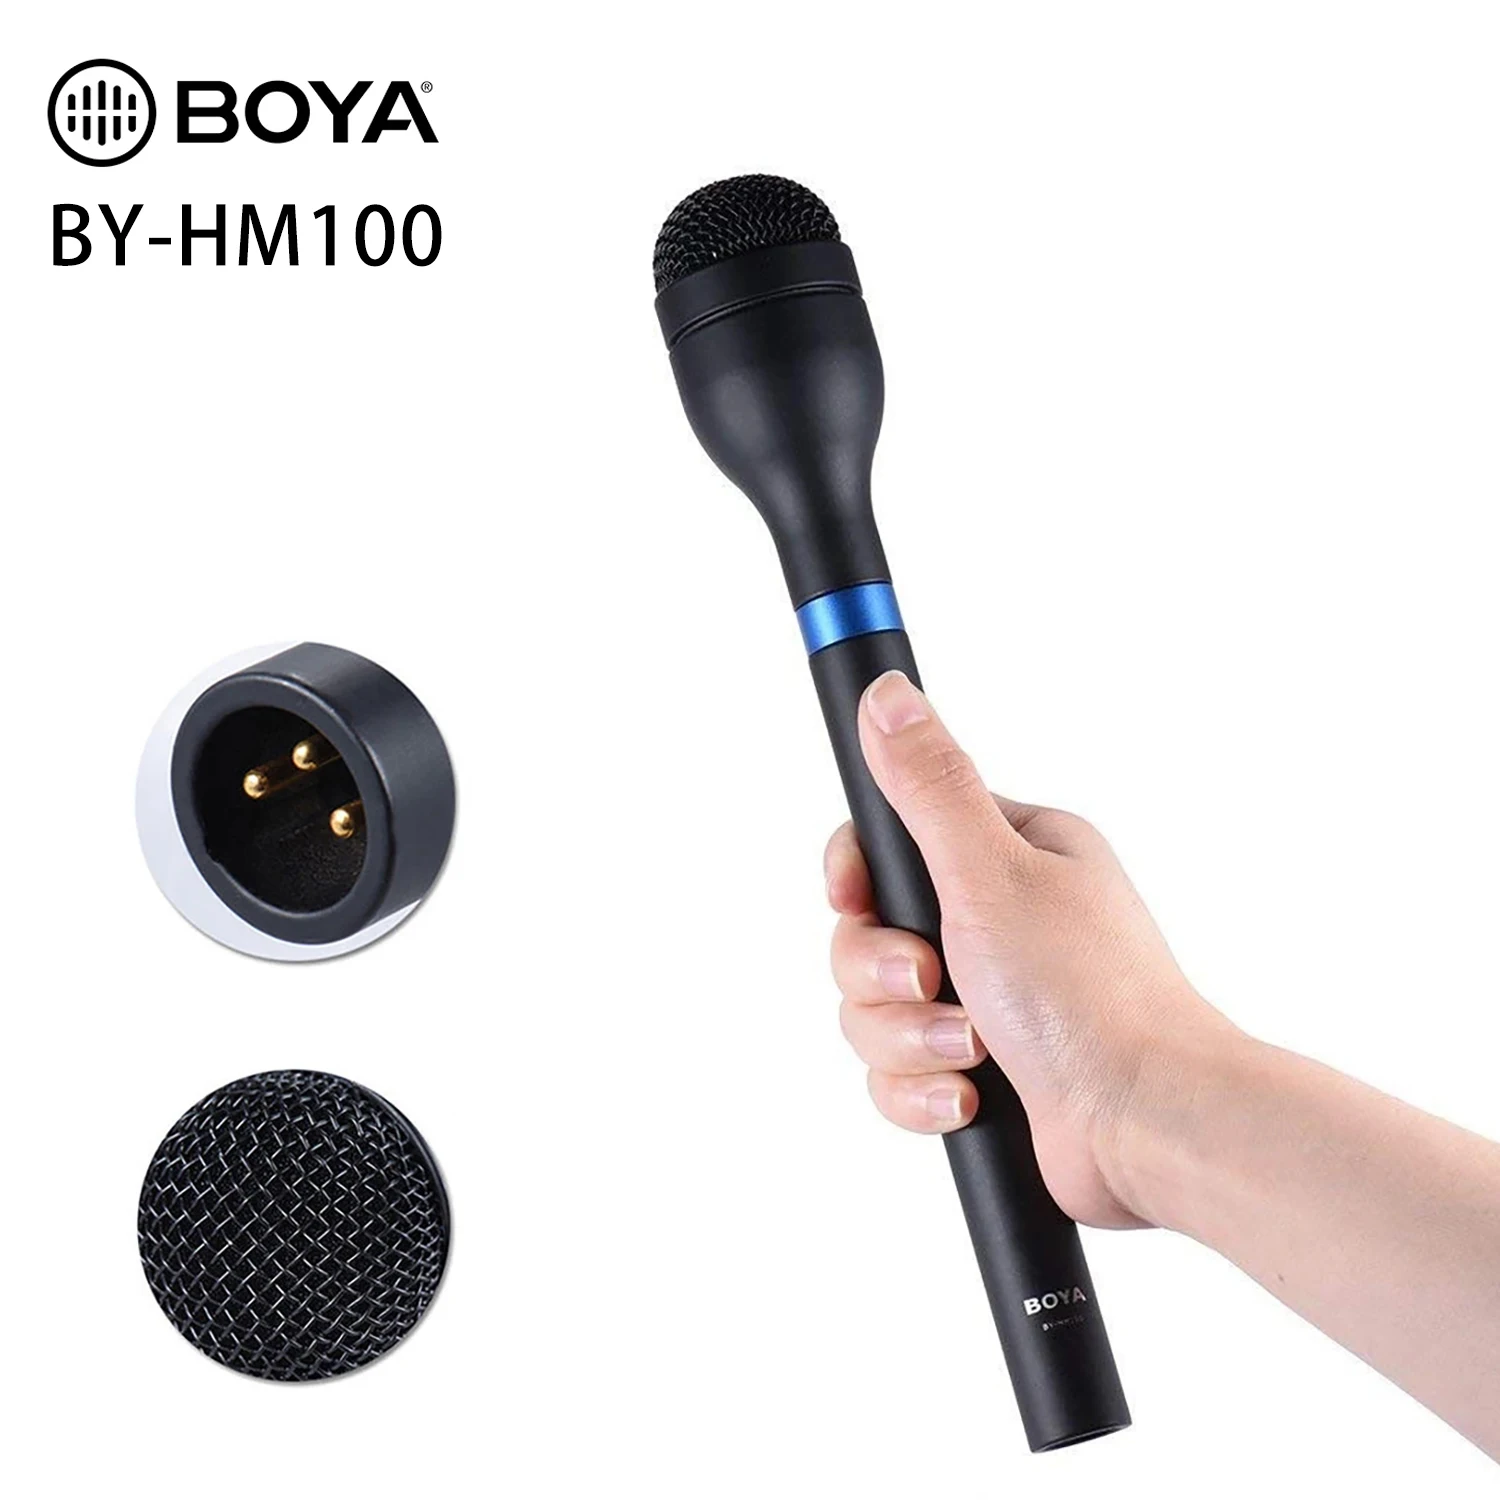 

BOYA BY-HM100 Omni-Directional Wireless Handheld Dynamic Microphone XLR Long Handle Mic for ENG EFP Interview / News Gathering